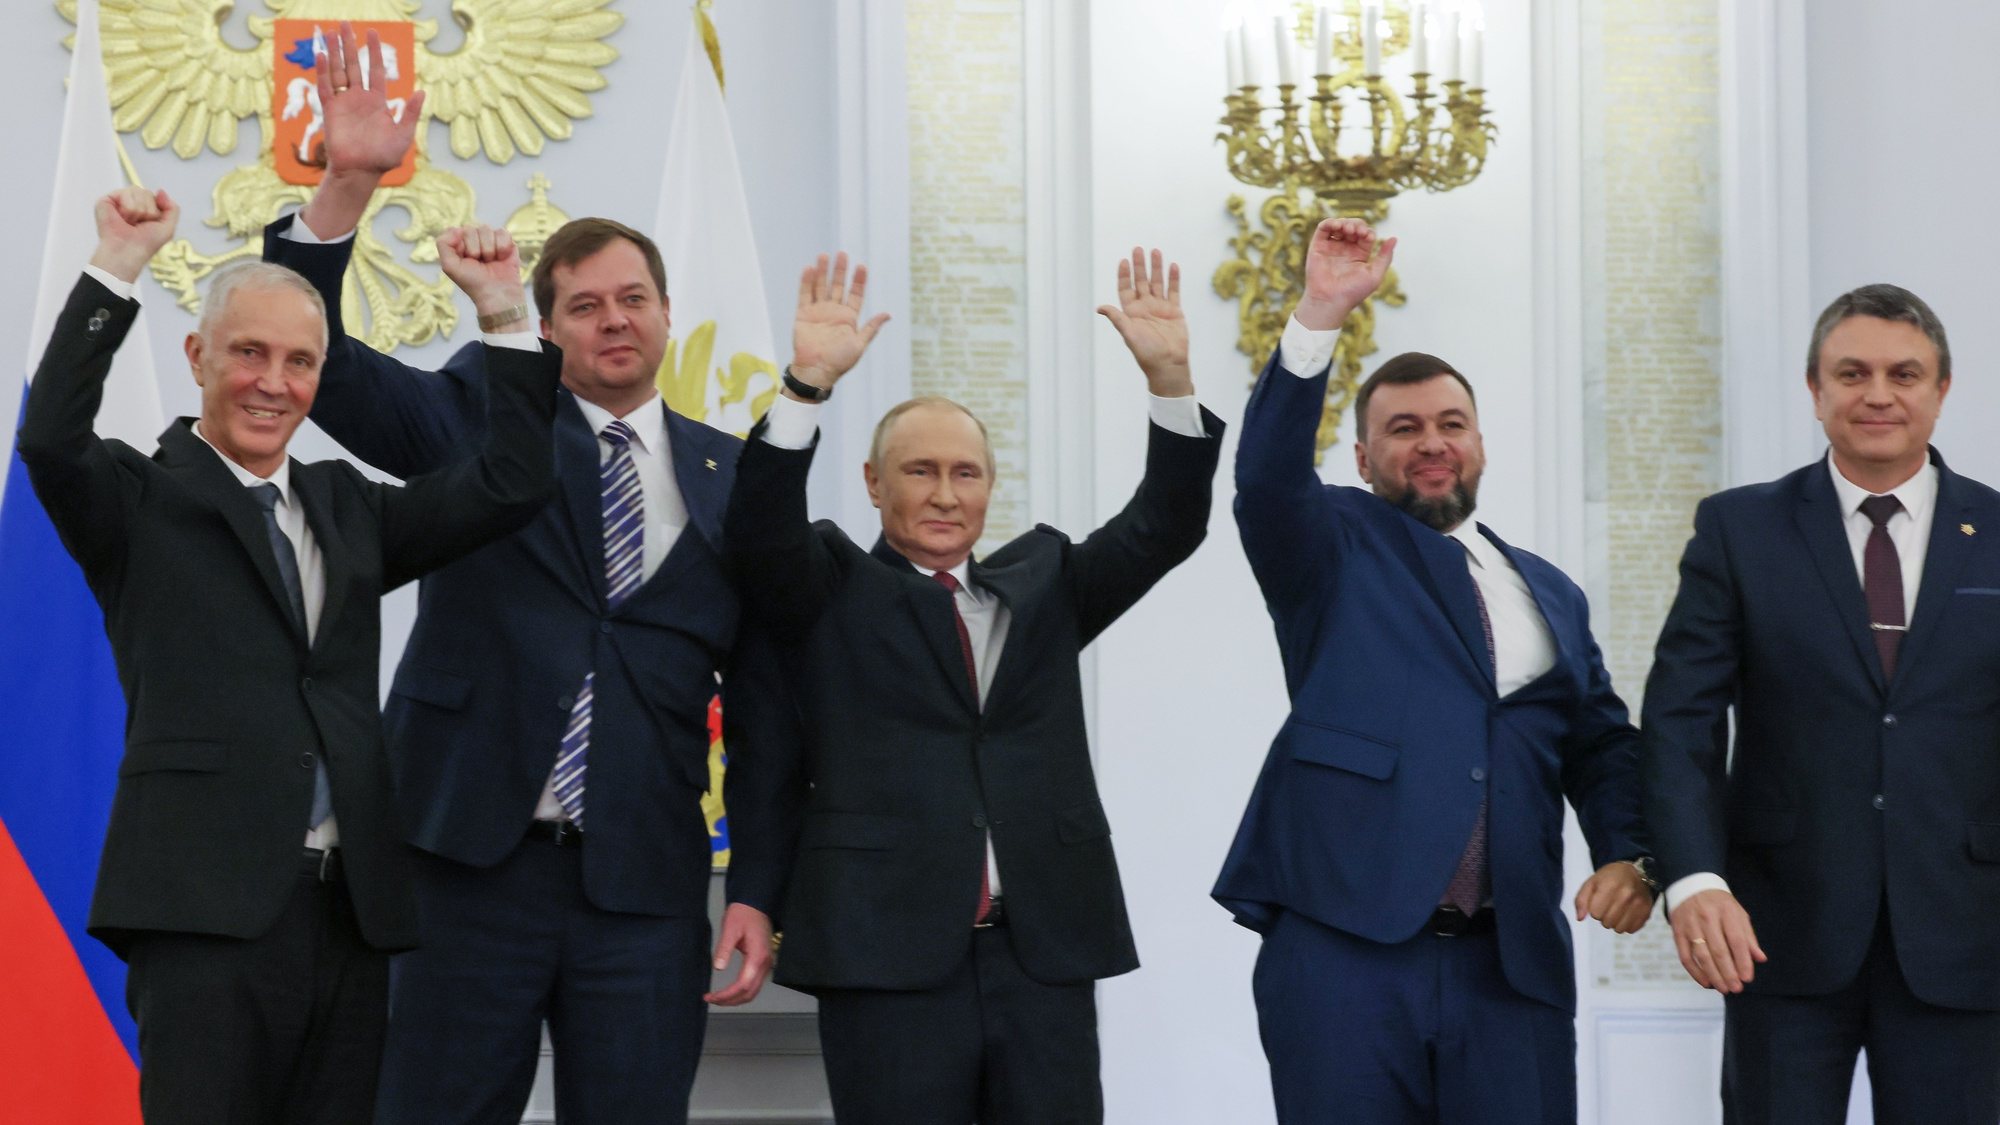 epa10215685 Russian President Vladimir Putin (C) with Head of the Donetsk People&#039;s Republic Denis Pushilin (2nd-R), Head of the Luhansk People&#039;s Republic Leonid Pasechnik (R), Head of the Zaporozhye Region Yevhen Balitsky (2nd-L), Head of the Kherson Region Vladimir Saldo (L) celebrate during a ceremony to sign treaties on new territories&#039; accession to Russia at the Grand Kremlin Palace in Moscow, Russia, 30 September 2022. From 23 to 27 September, residents of the self-proclaimed Luhansk and Donetsk People&#039;s Republics as well as the Russian-controlled areas of the Kherson and Zaporizhzhia regions of Ukraine voted in a so-called &#039;referendum&#039; to join the Russian Federation.  EPA/MIKHAIL METZEL/SPUTNIK/KREMLIN POOL MANDATORY CREDIT